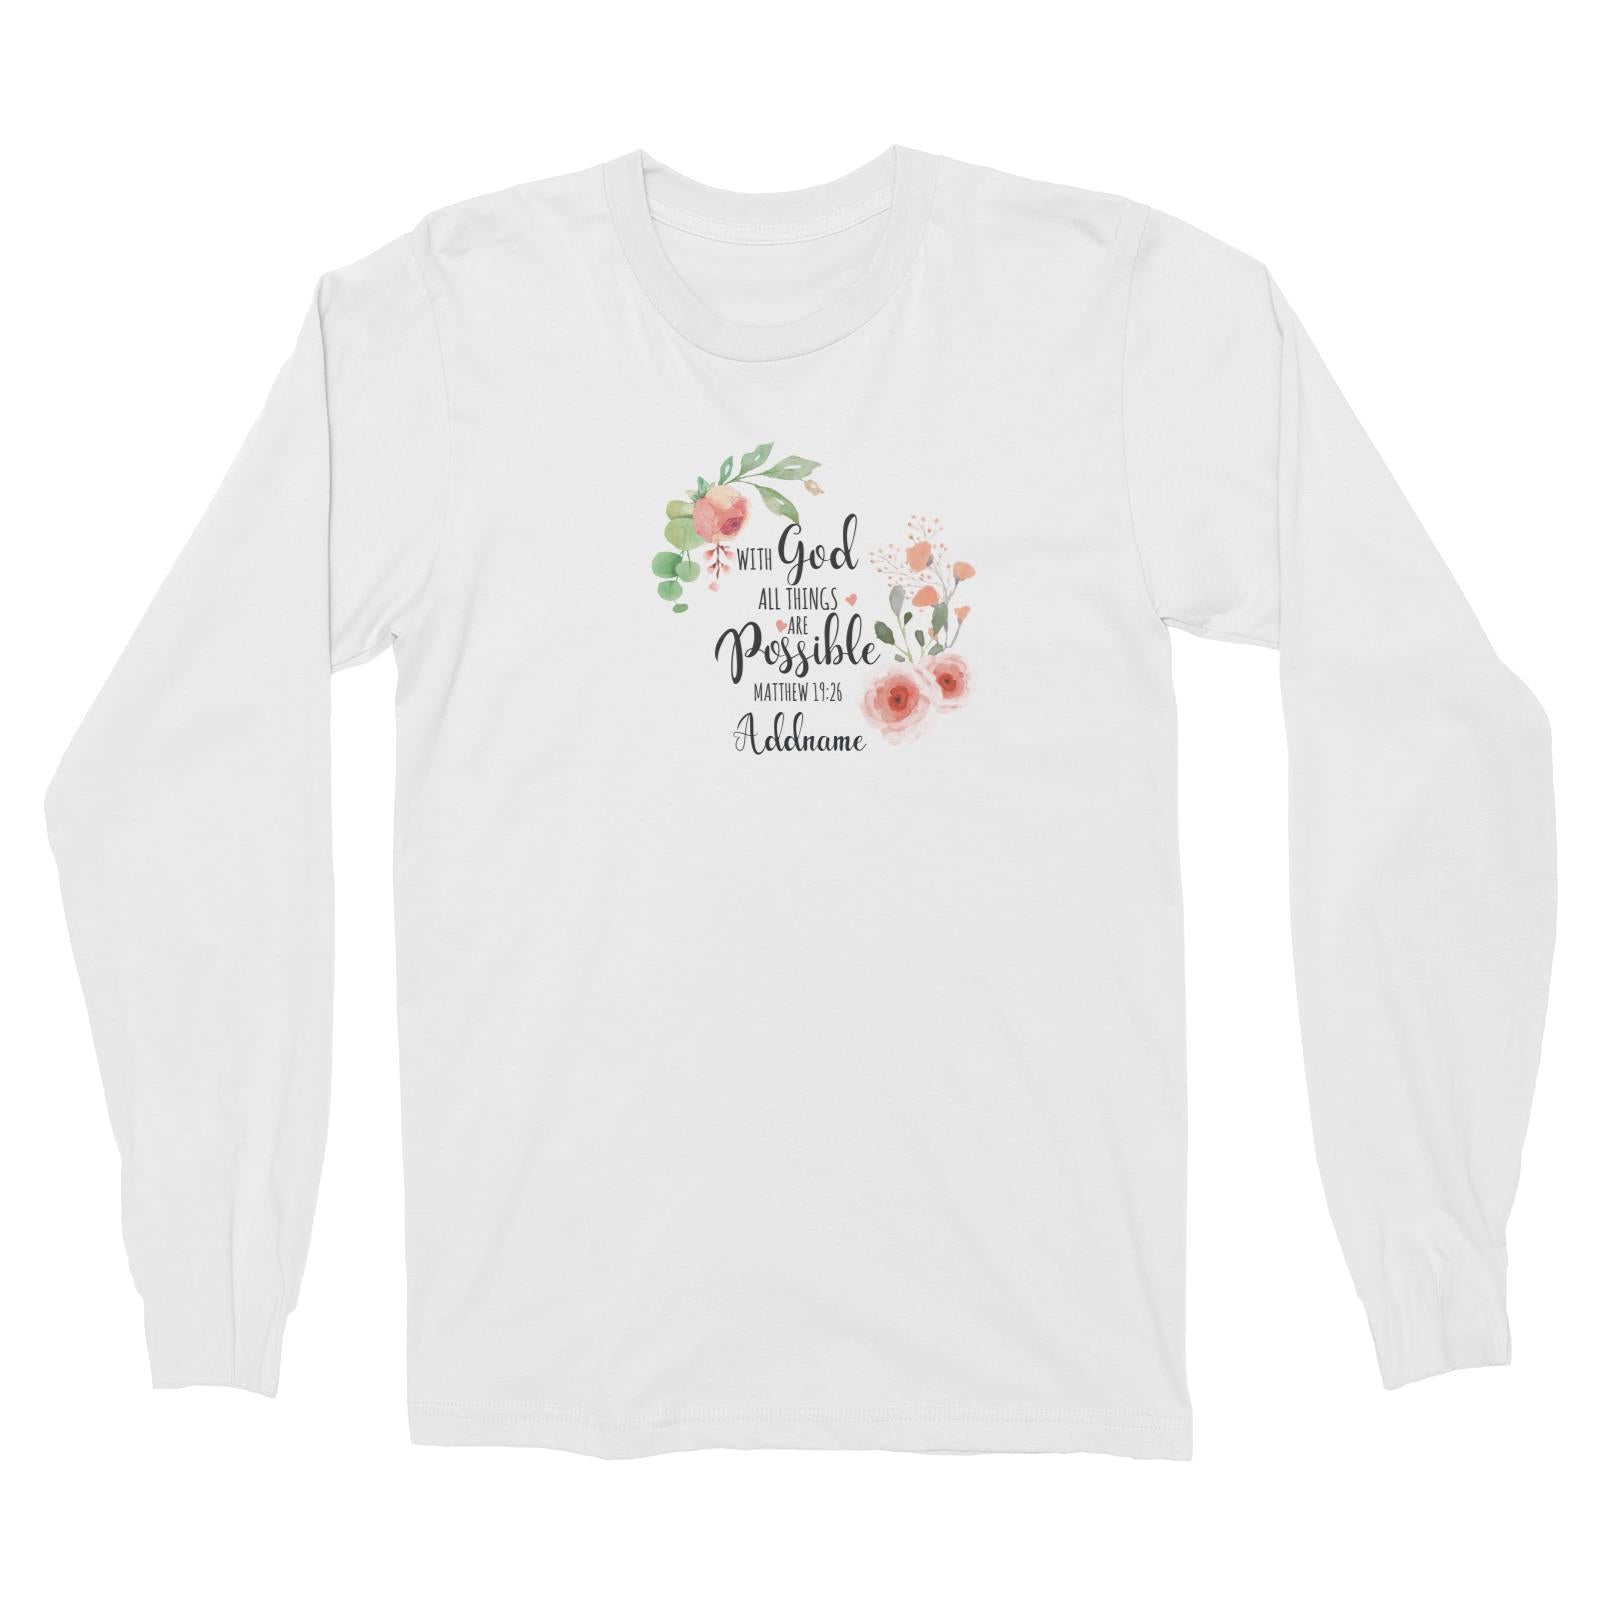 Gods Gift With God All Things Are Possible Matthew 19.26 Addname Long Sleeve Unisex T-Shirt